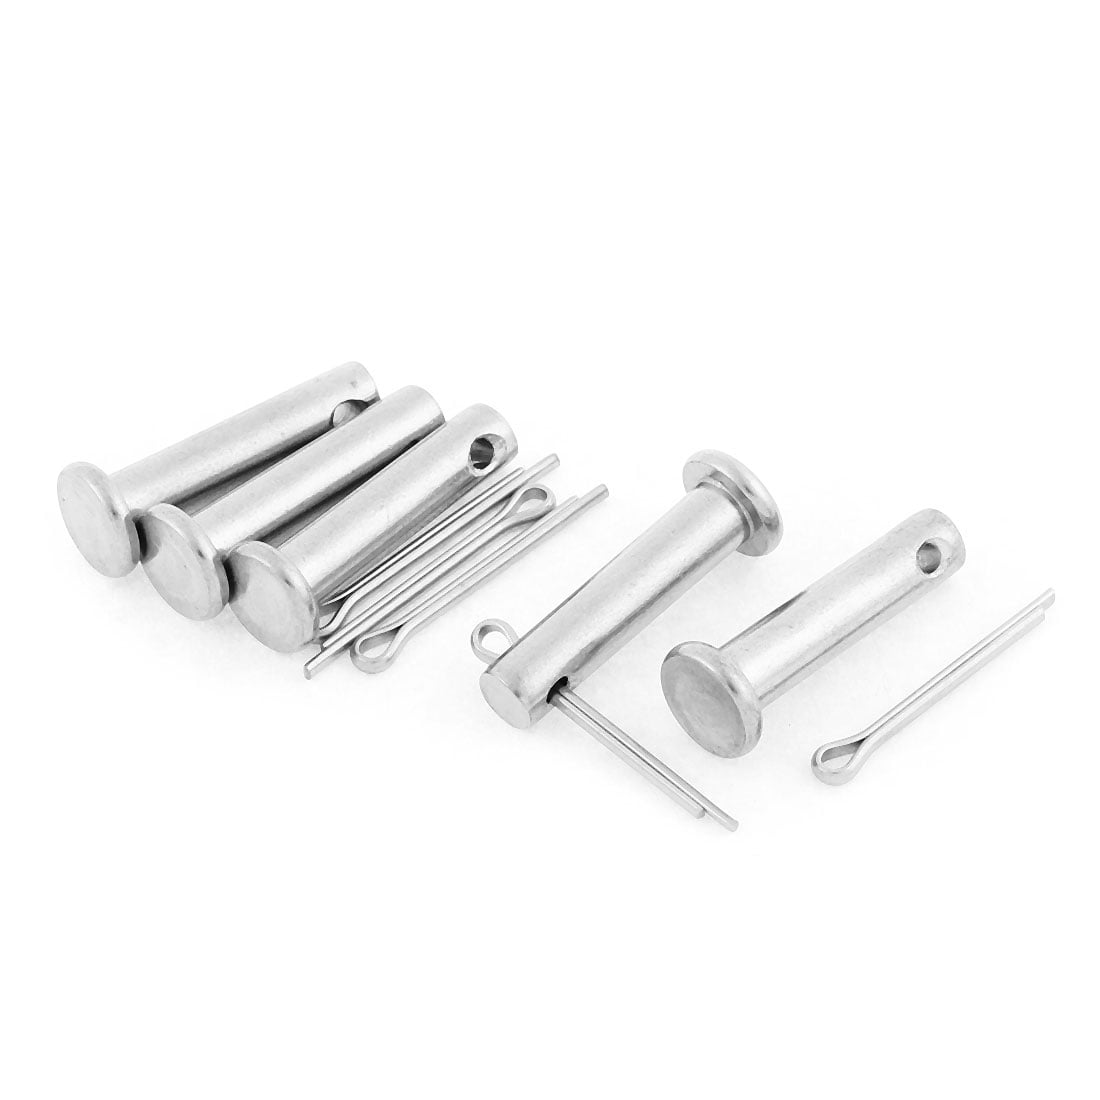 5Pcs Split Cotter Pin 3.5mm x 20mm 304 Stainless Steel 2-Prongs Silver Tone for Home DIY Application